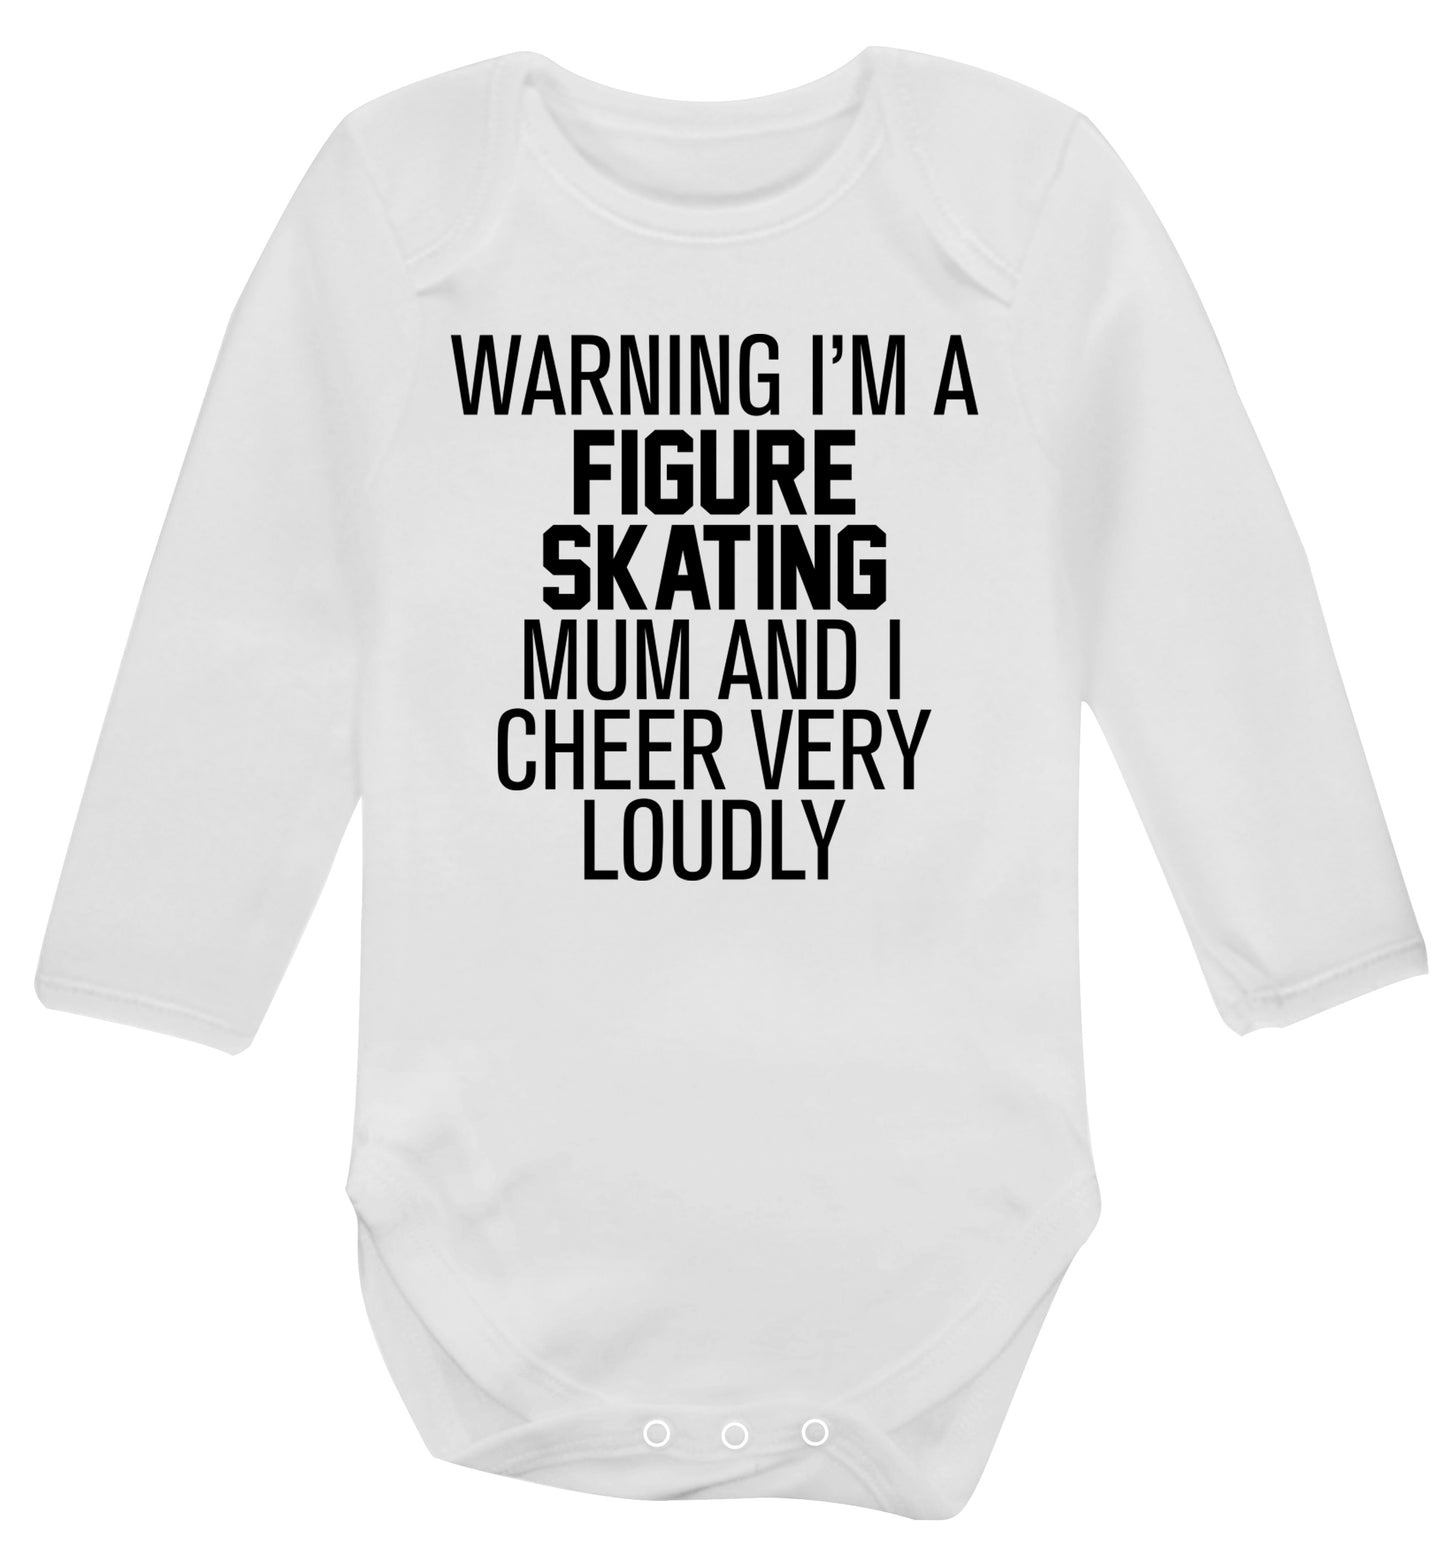 Warning I'm a figure skating mum and I cheer very loudly Baby Vest long sleeved white 6-12 months